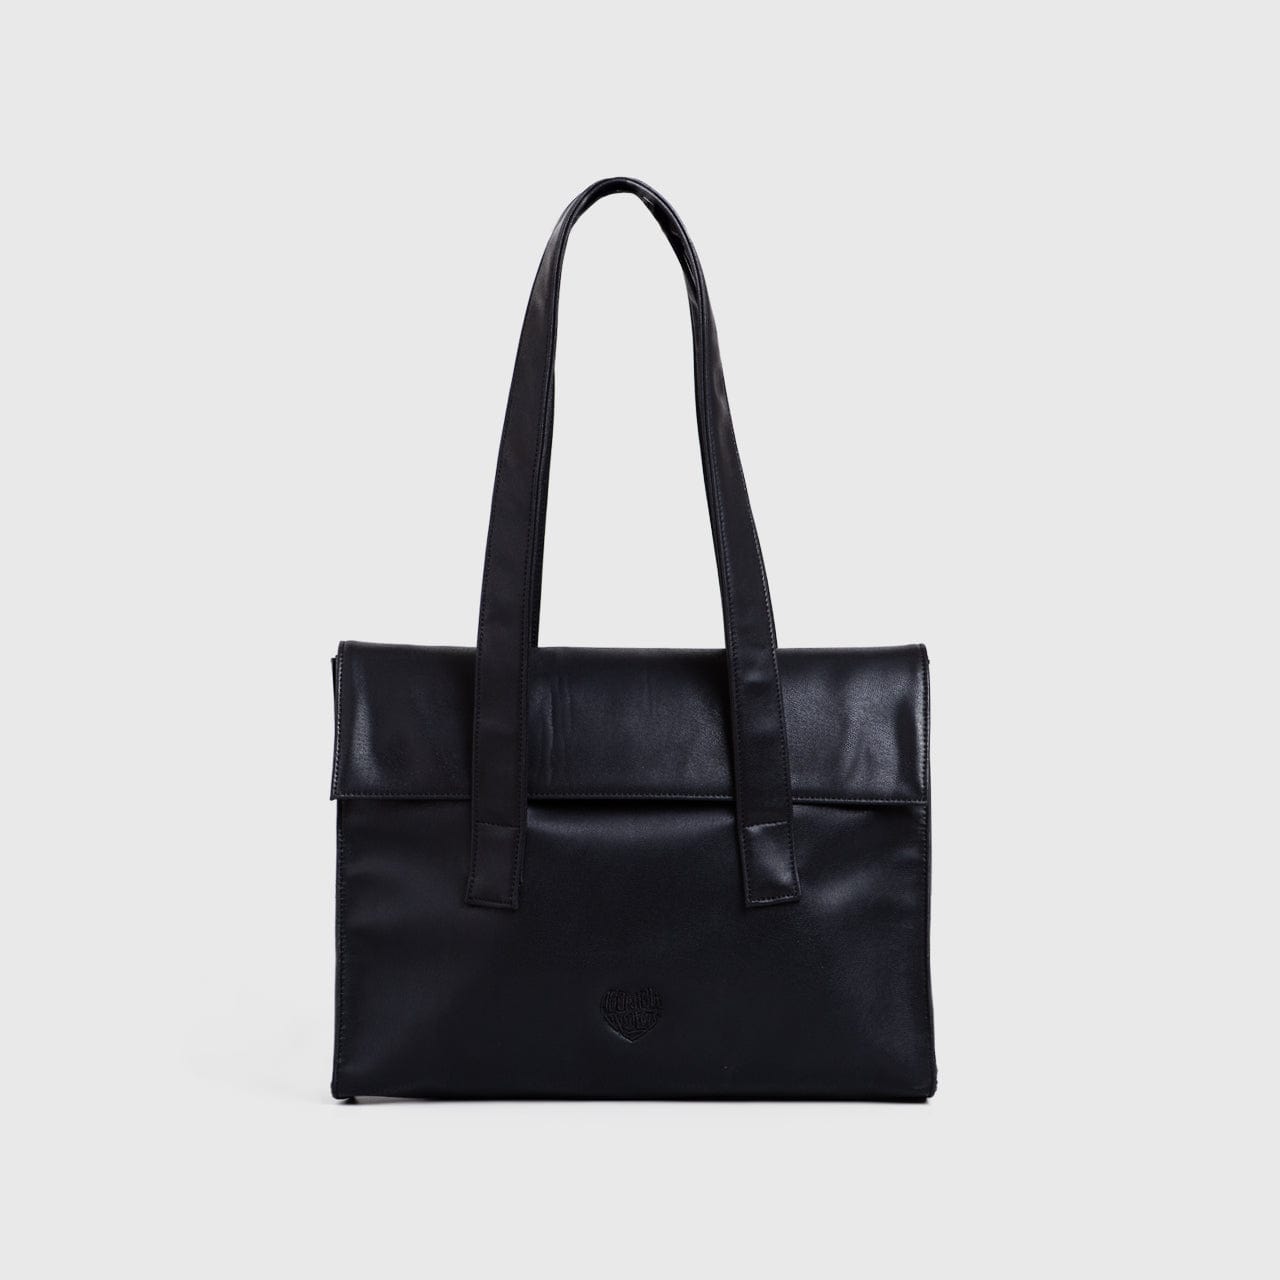 Adorable Projects Official Tesyla Bag Black